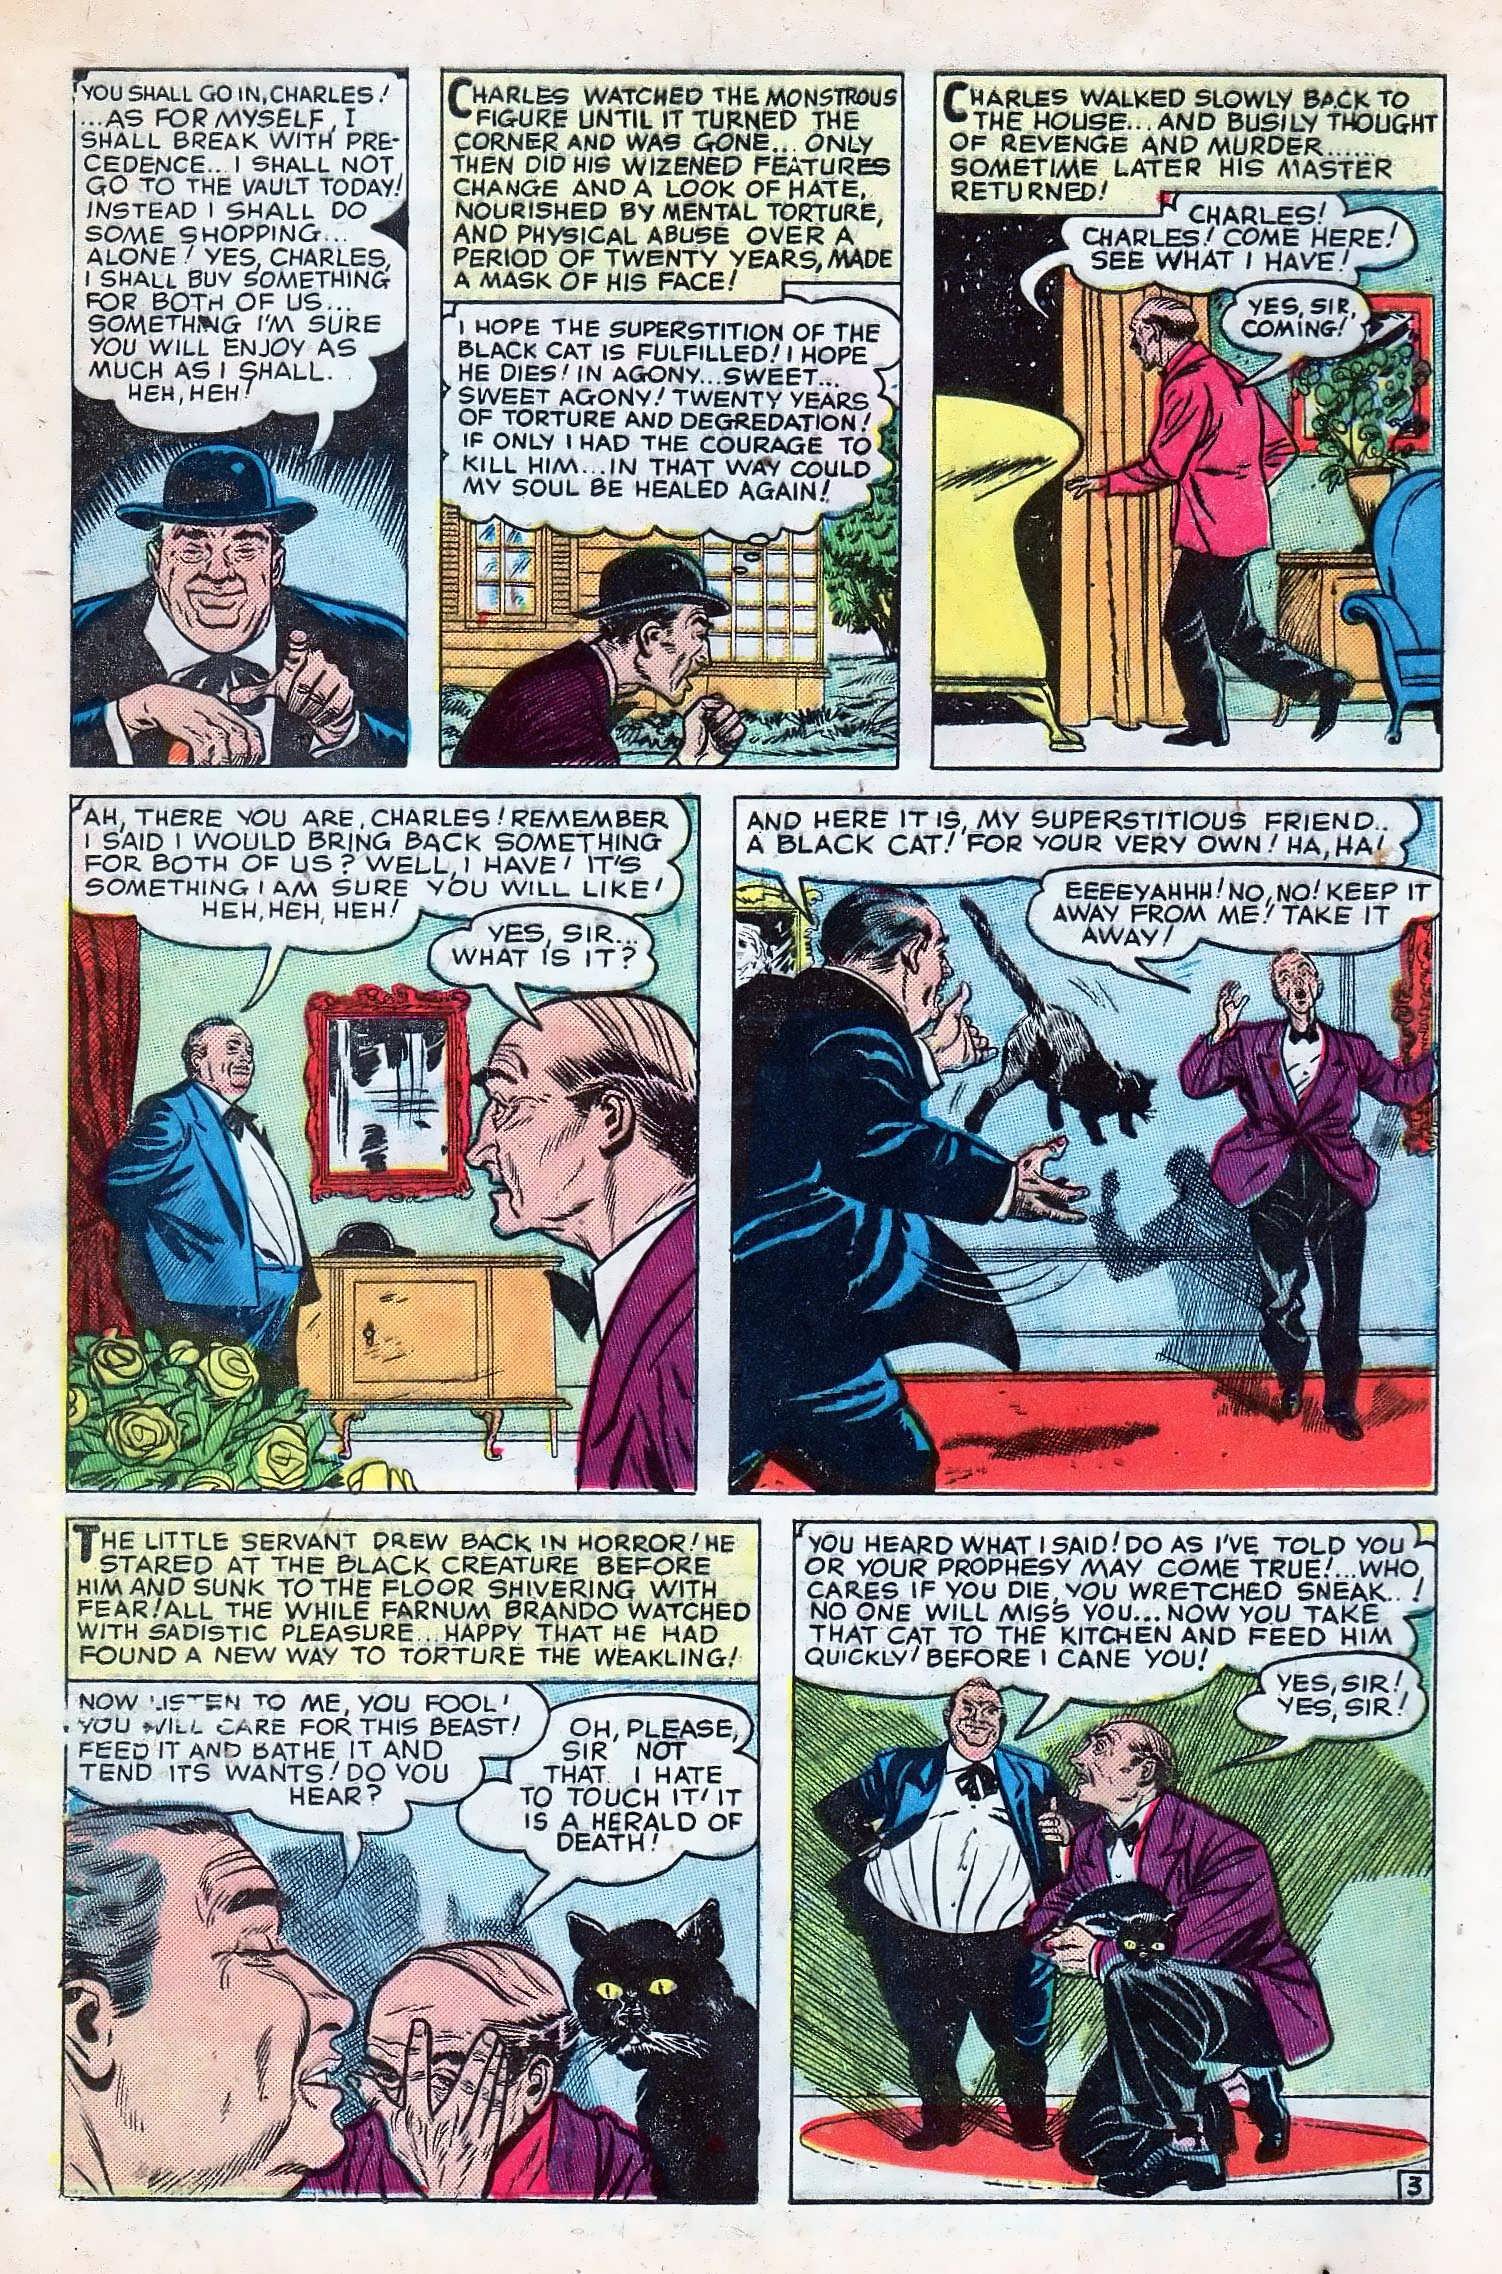 Marvel Tales (1949) 98 Page 11